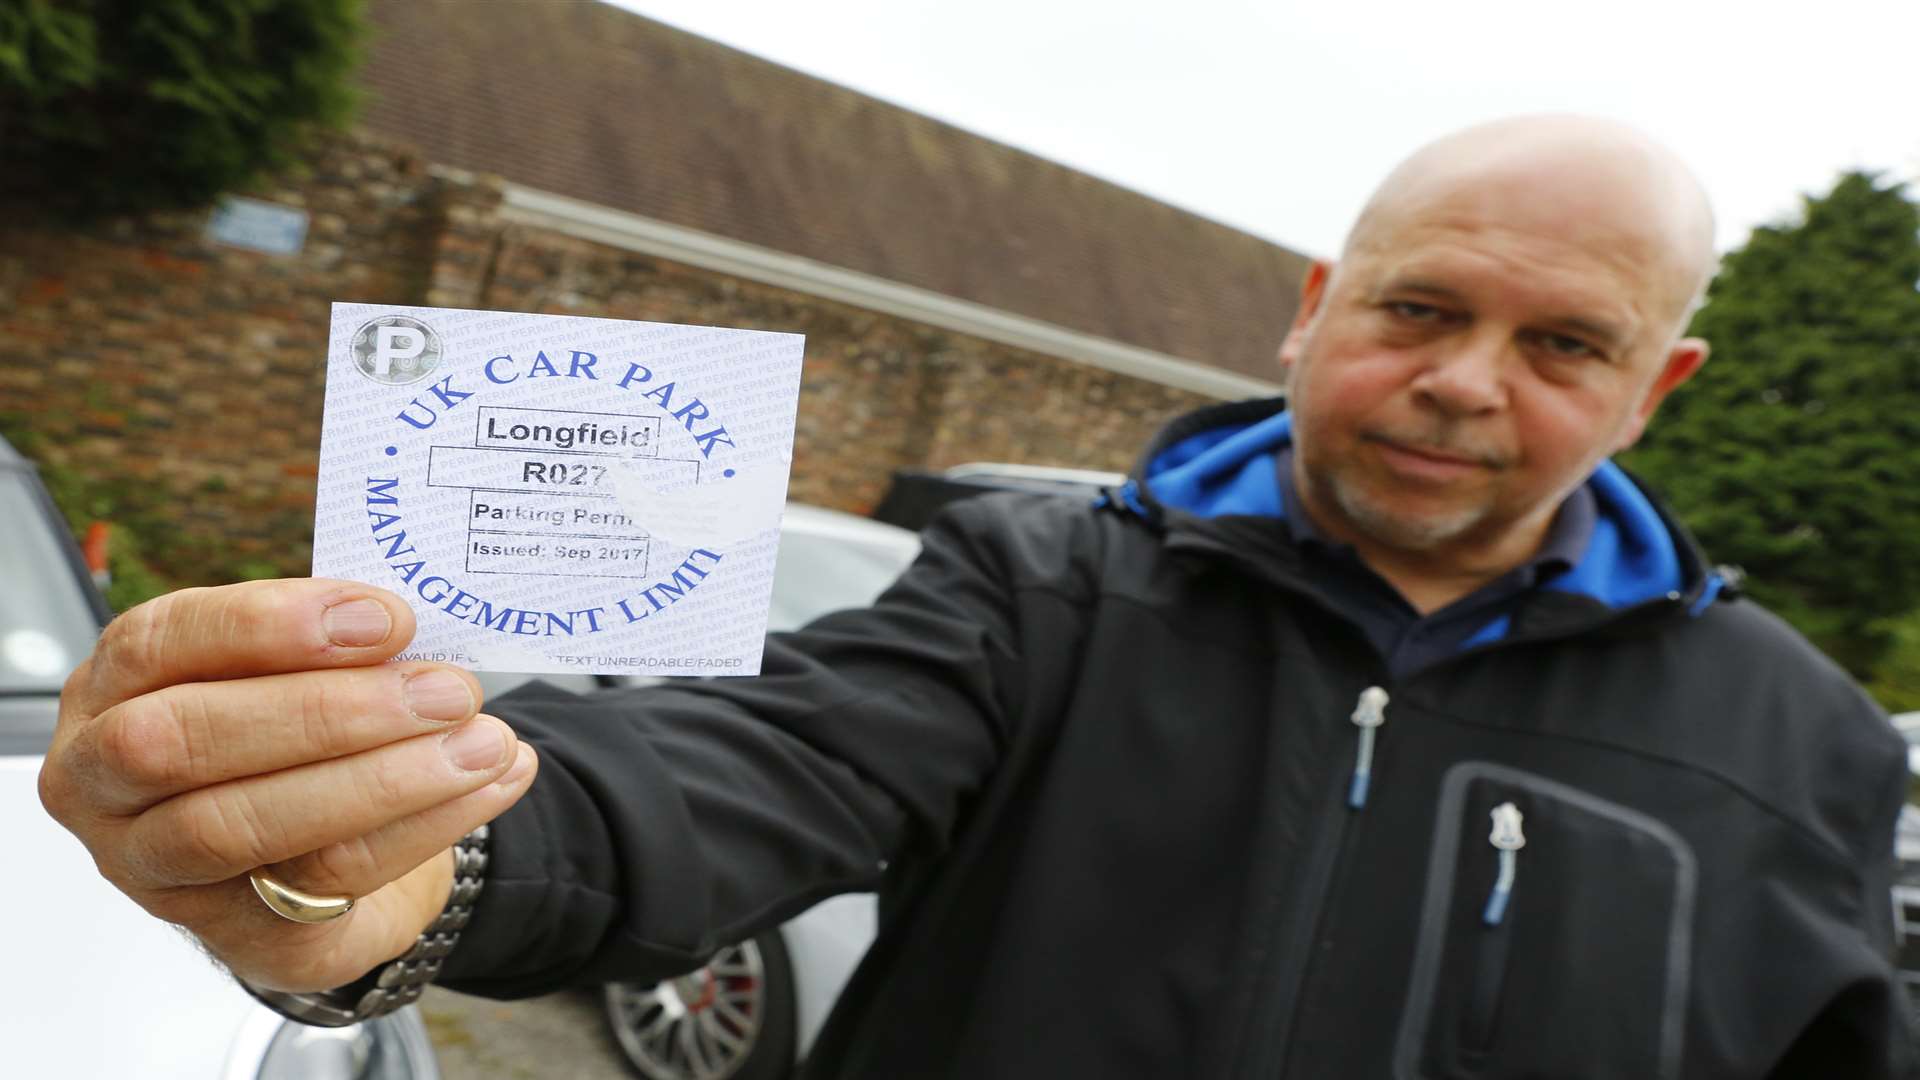 Tenterden resident Shaun Akehurst received a letter and permit from CPM